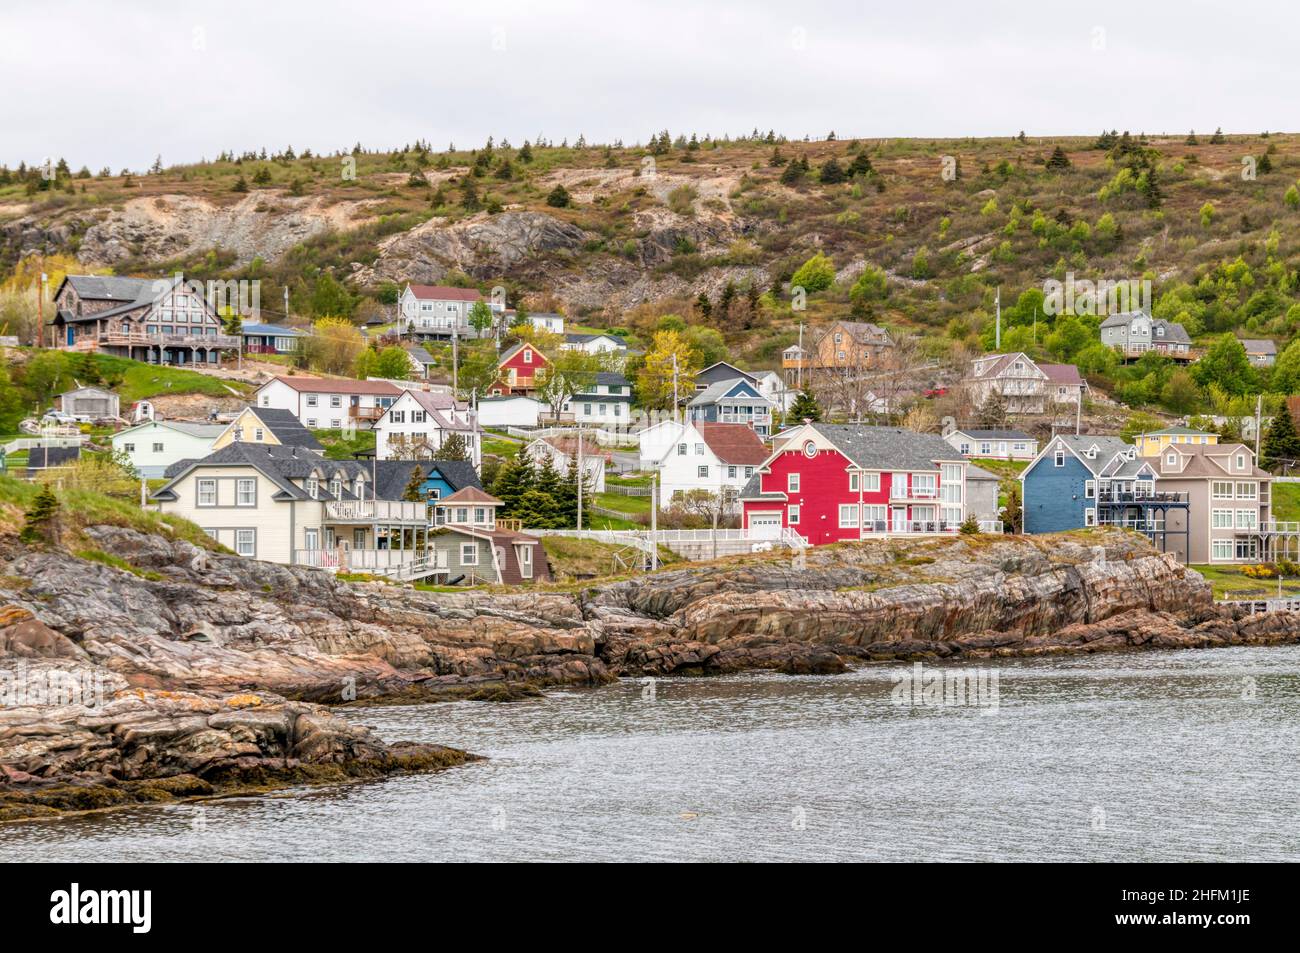 The small town of Brigus on the Avalon Peninsula in Newfoundland, Canada. Stock Photo